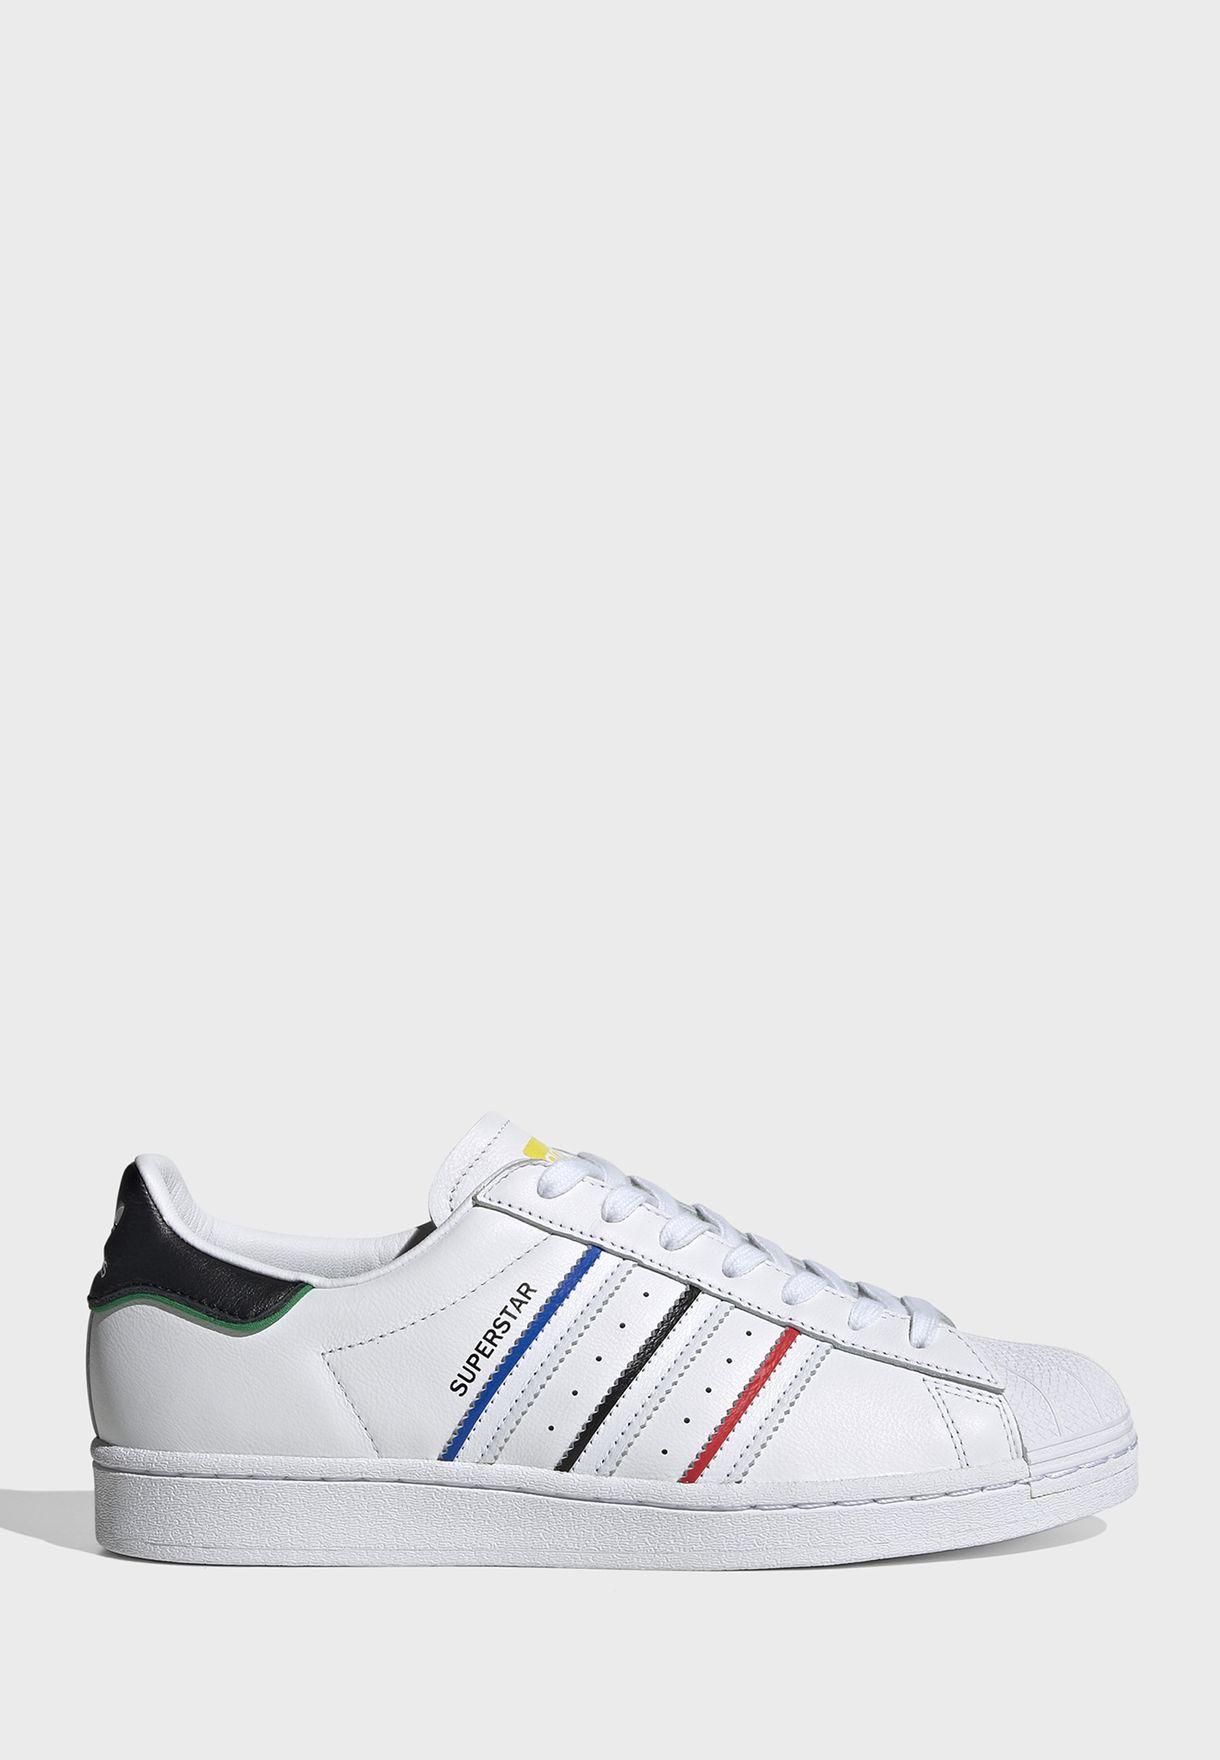 Superstar Casual Men's Sneakers Shoes